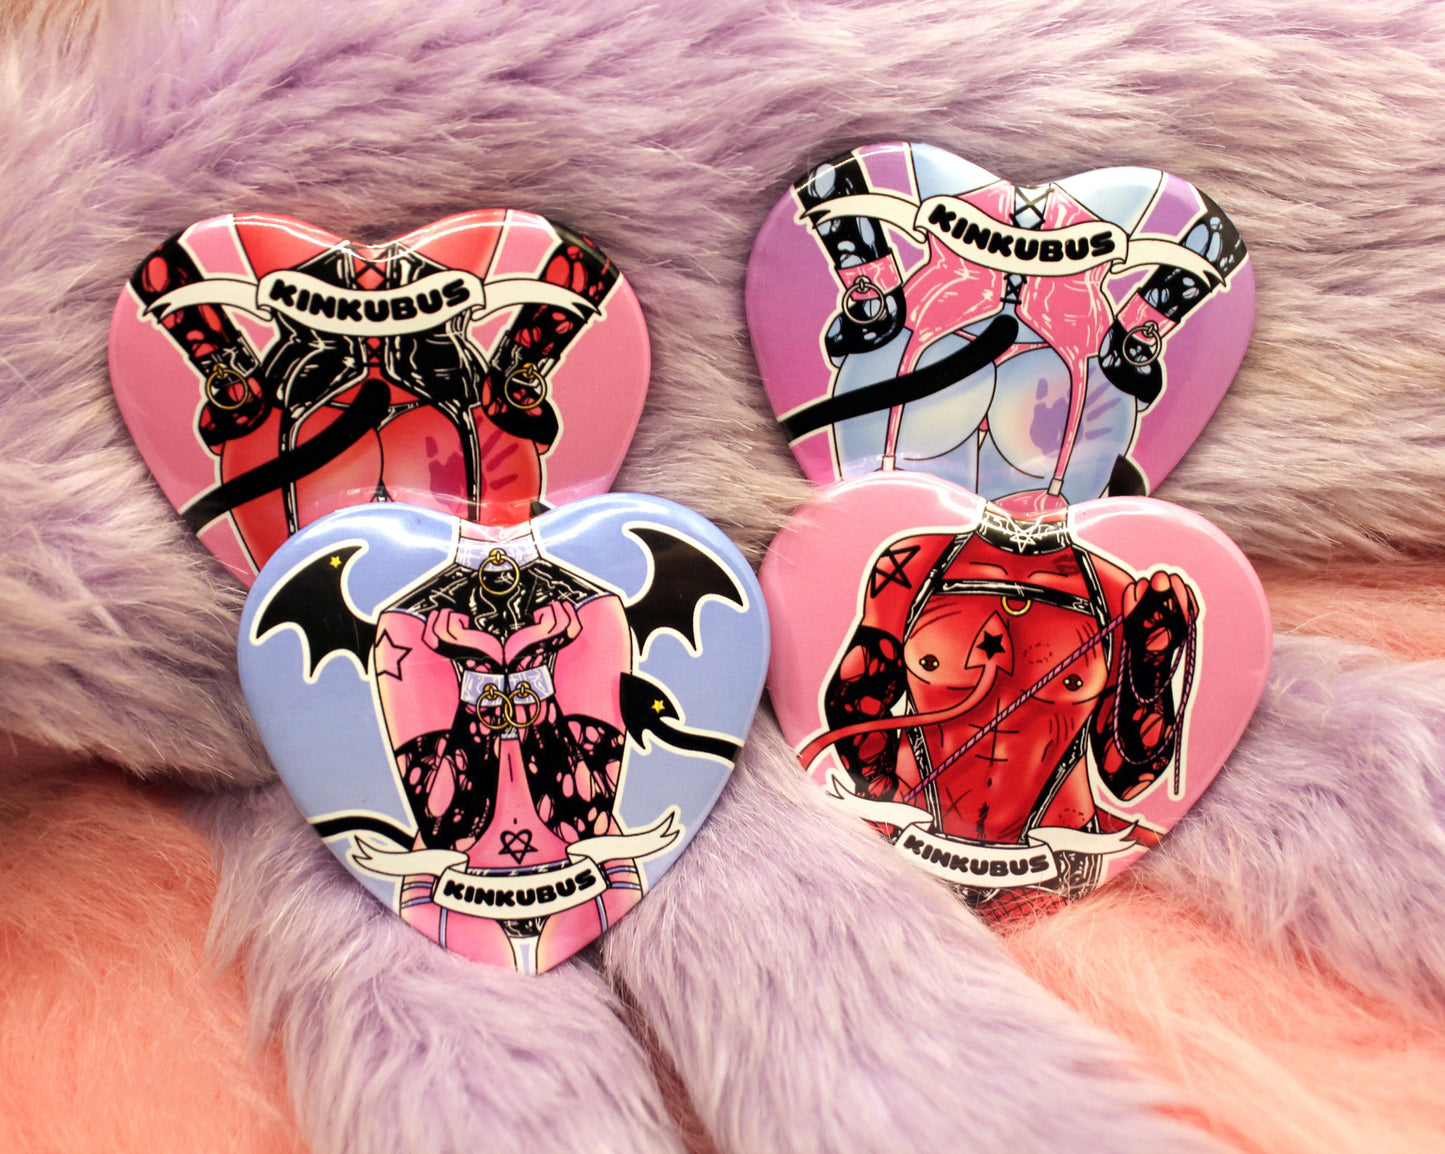 Kinkubus Blue Succubus Heart Badge (55mm) - Pink and Blue Variant